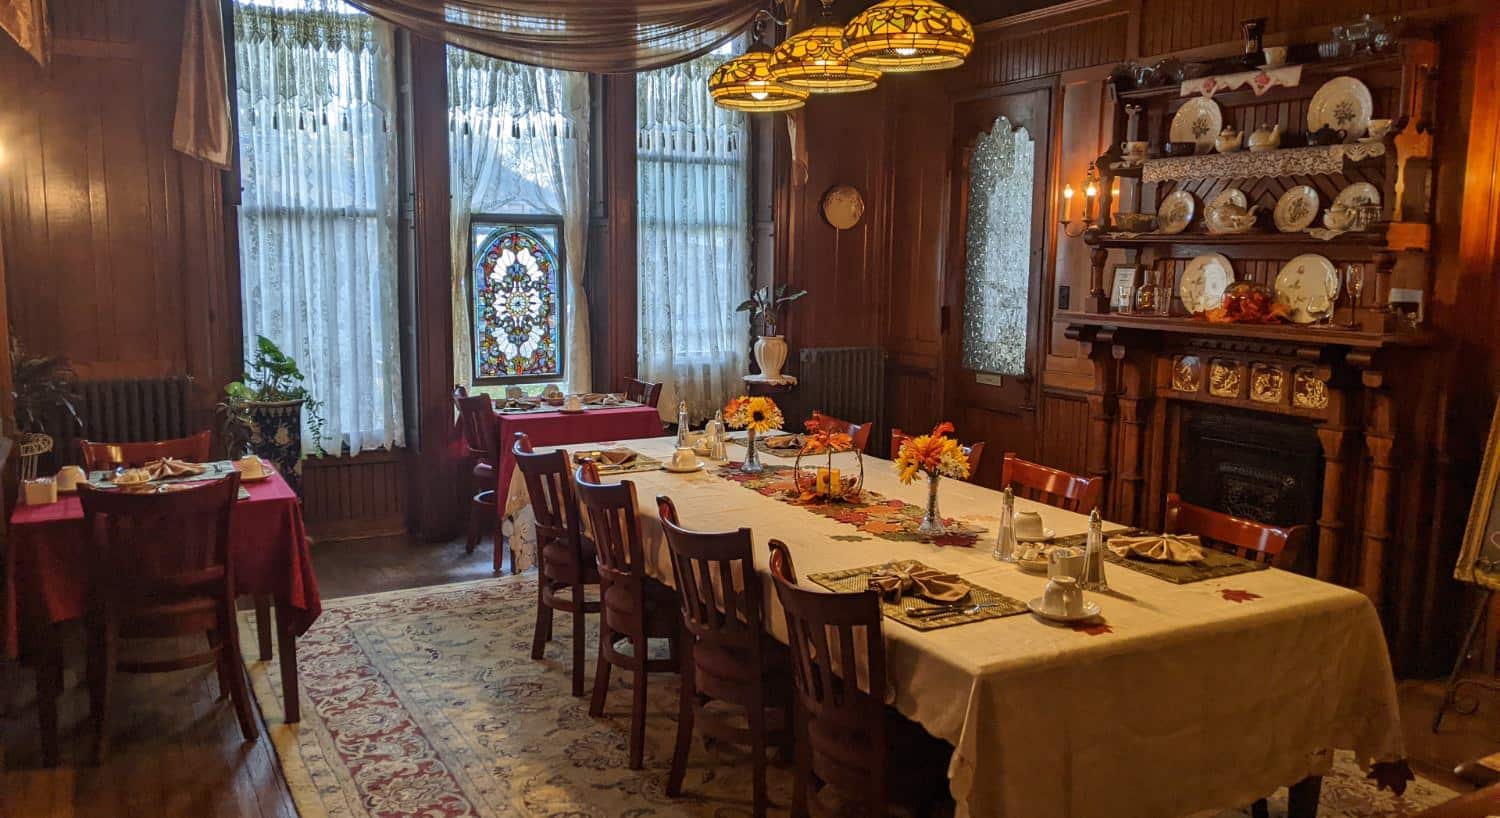 Large dining room with wooden paneling and flooring, fireplace with wood mantel, two small dining tables, and one large dining table with multiple placesettings